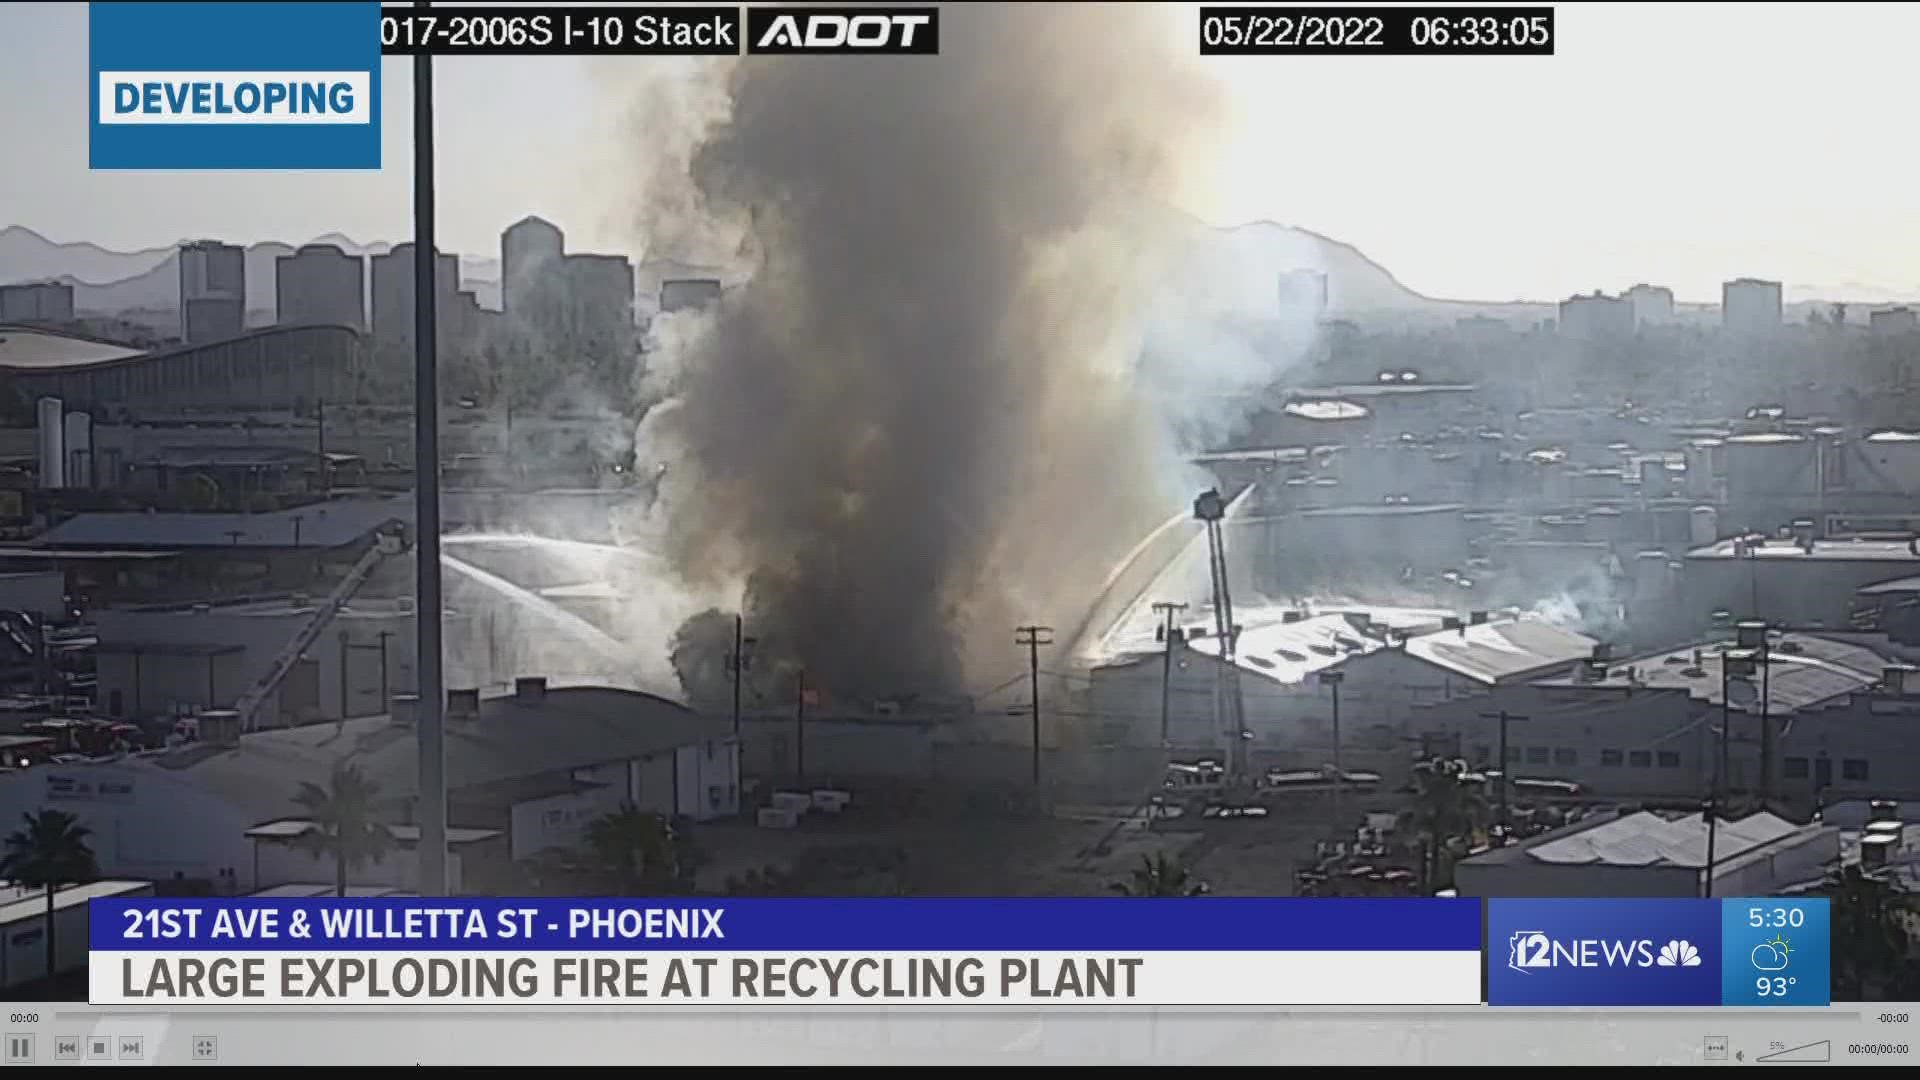 Crews from the Phoenix Fire Department responded to the plant near 21st Avenue and Willetta Street around 5:45 a.m.